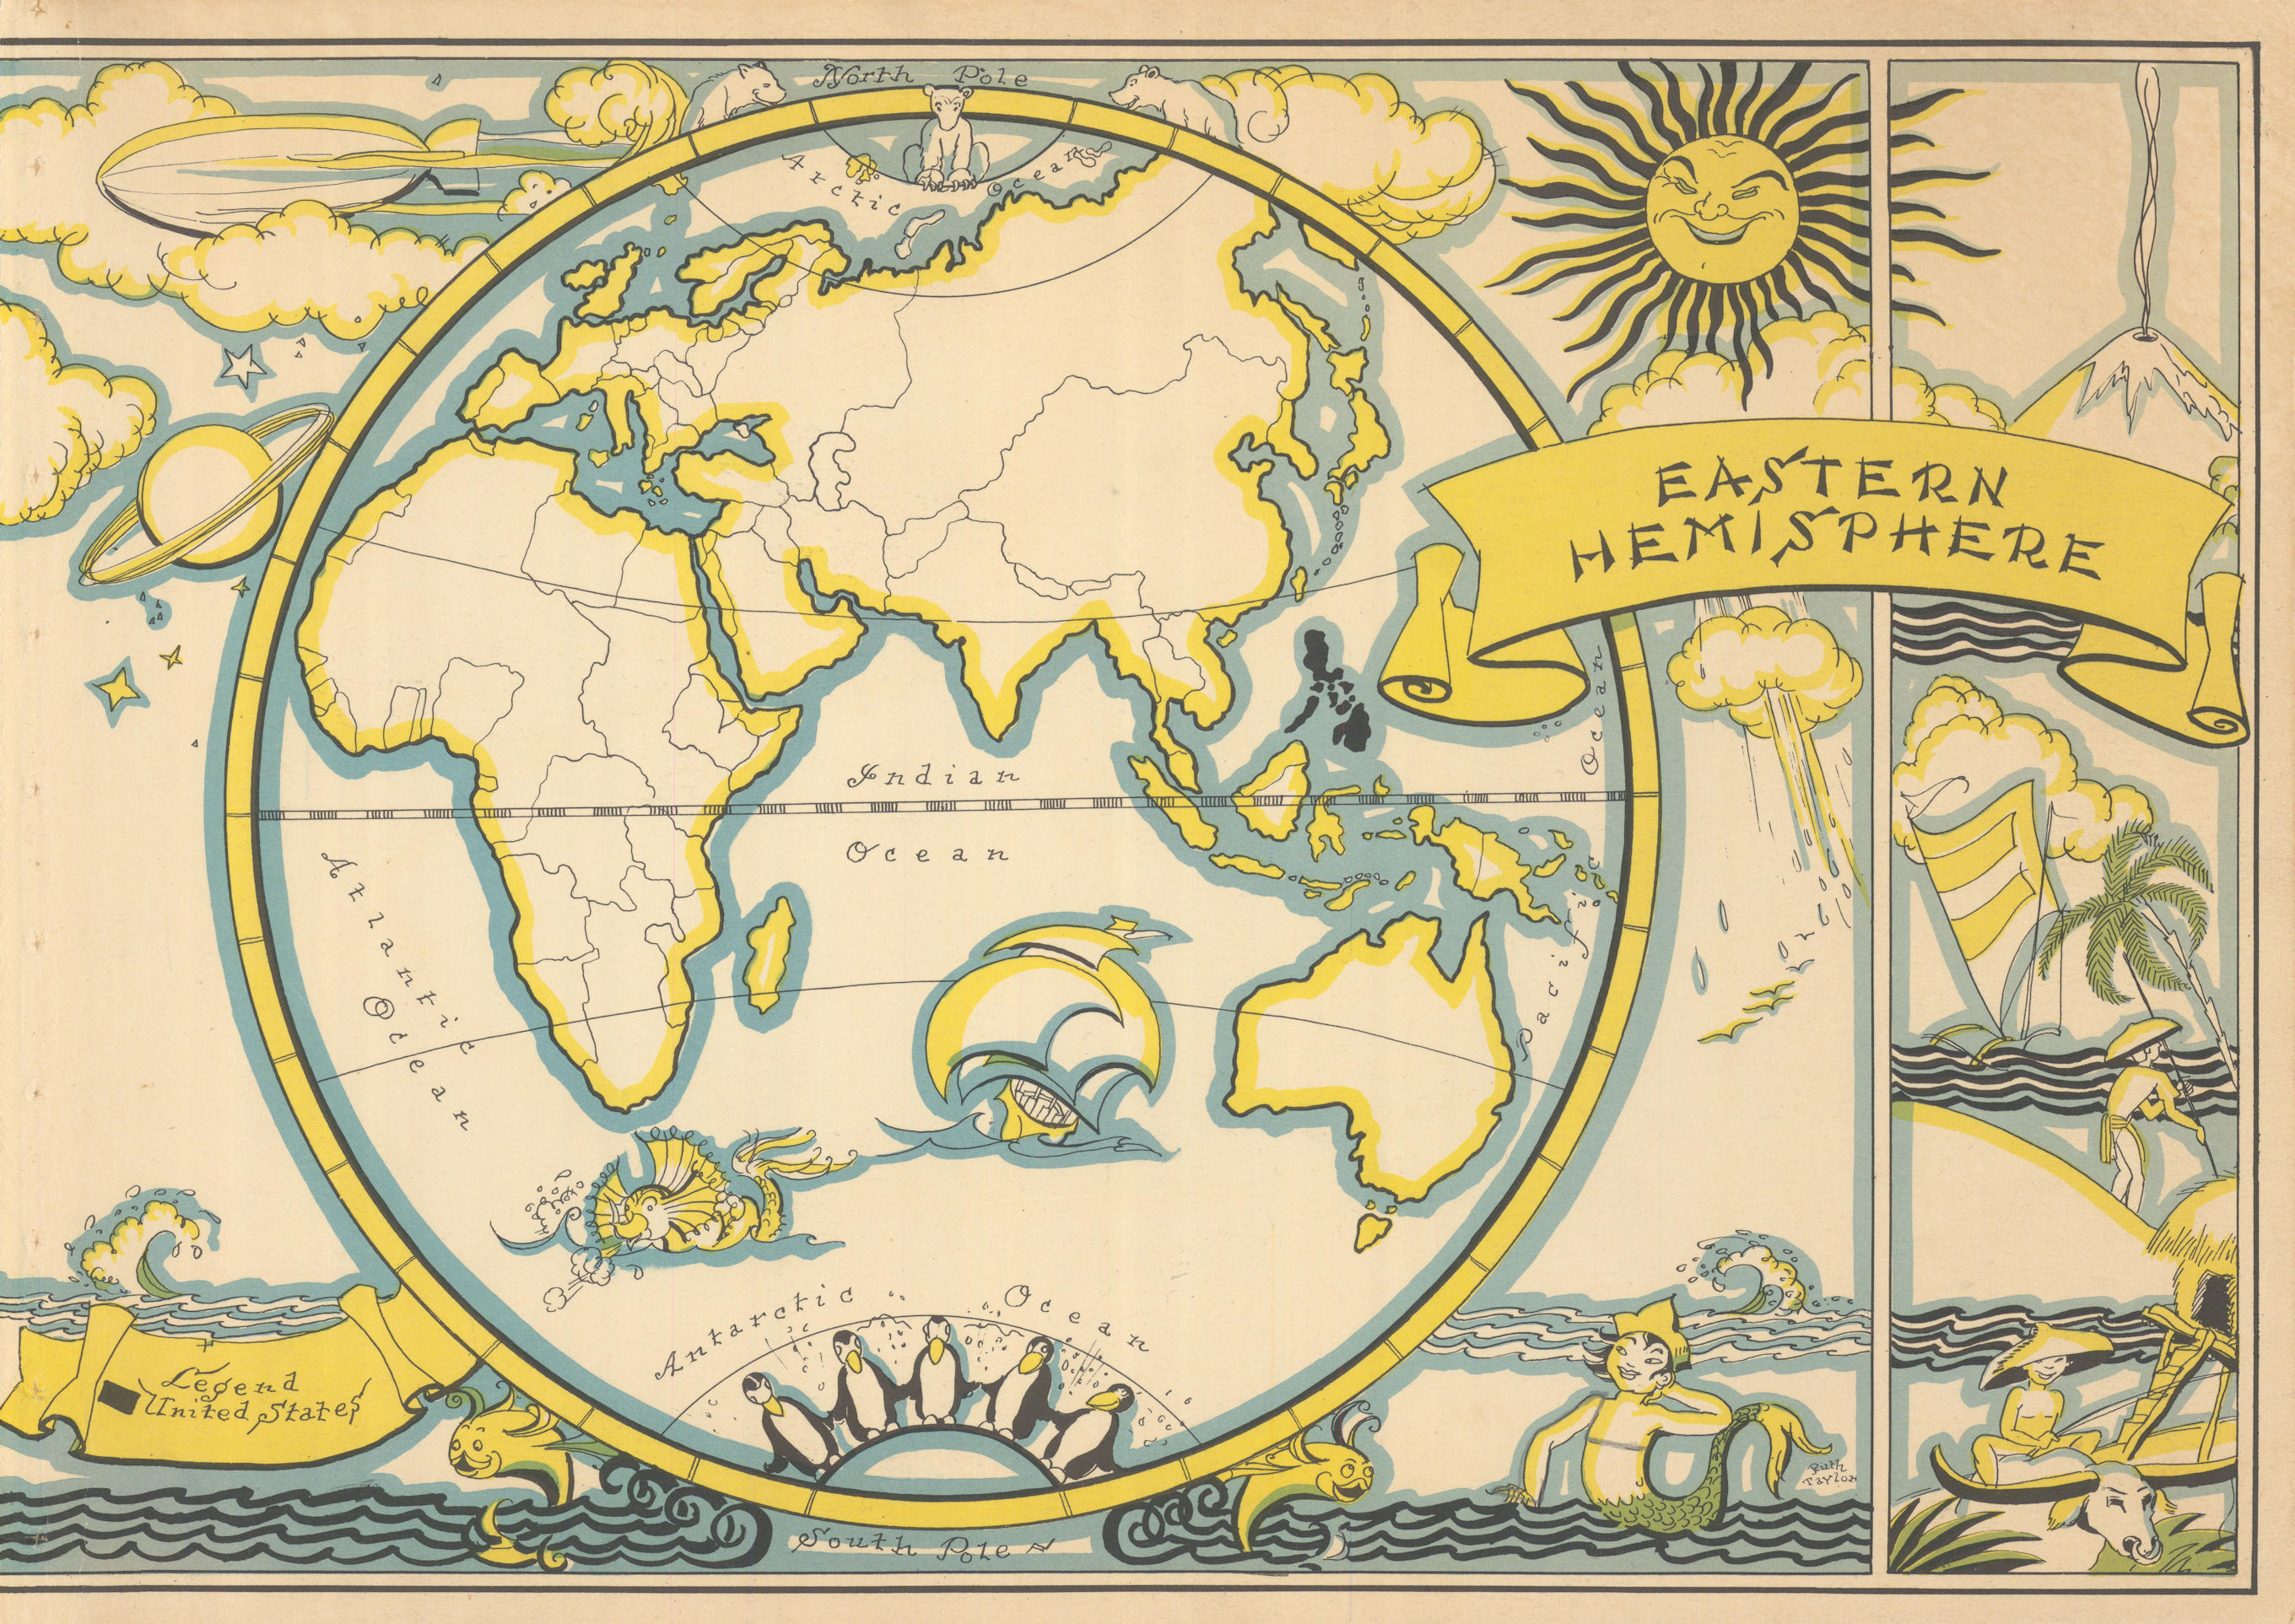 Associate Product Eastern Hemisphere. Pictorial map by Ruth Taylor White 1935 old vintage